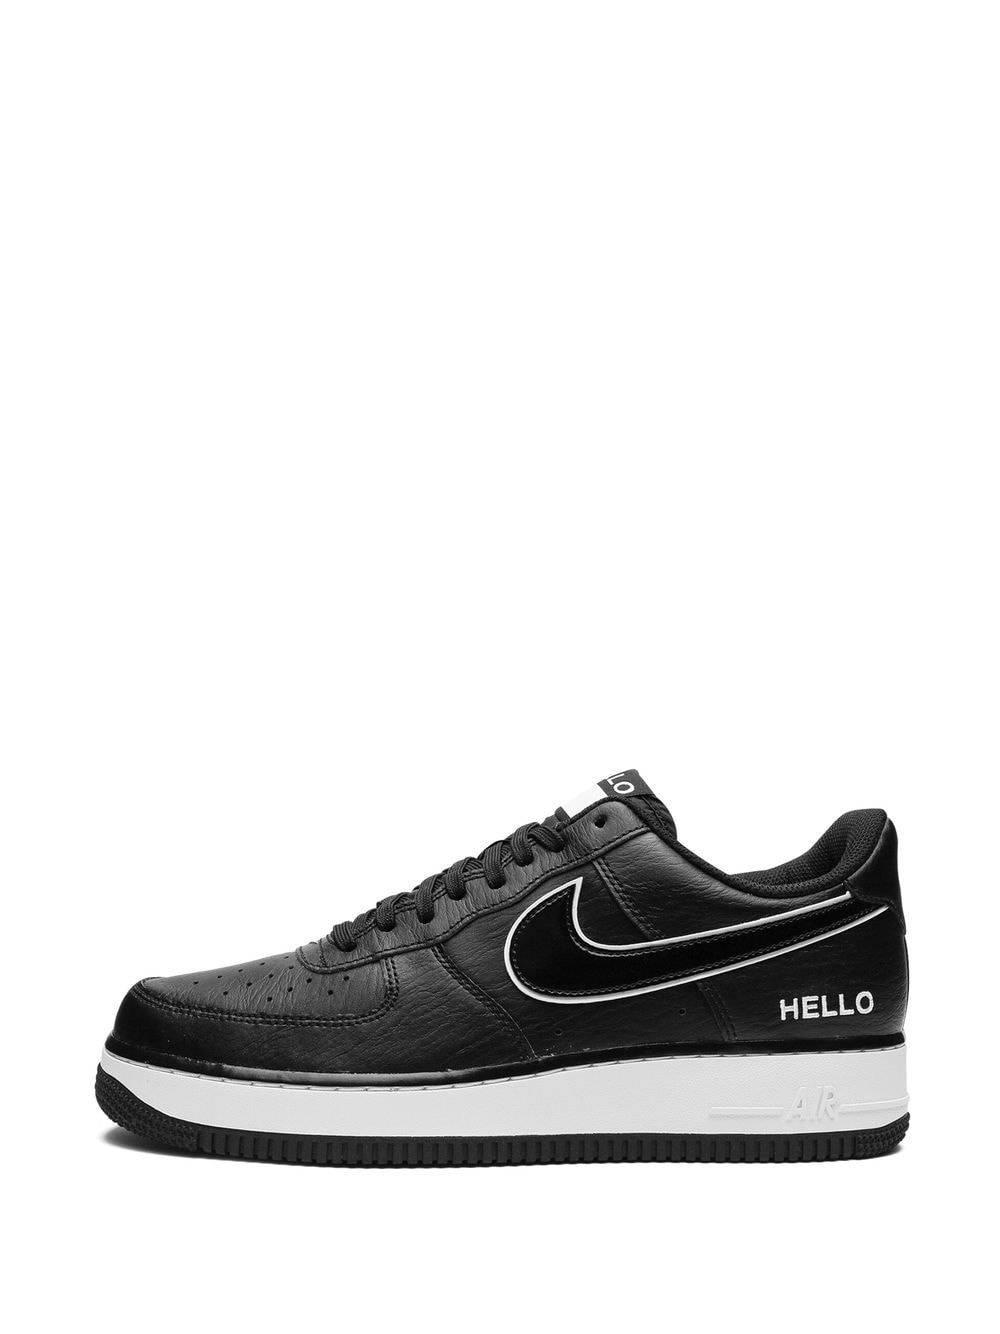 Air Force 1 '07 LX "Hello" sneakers - 5